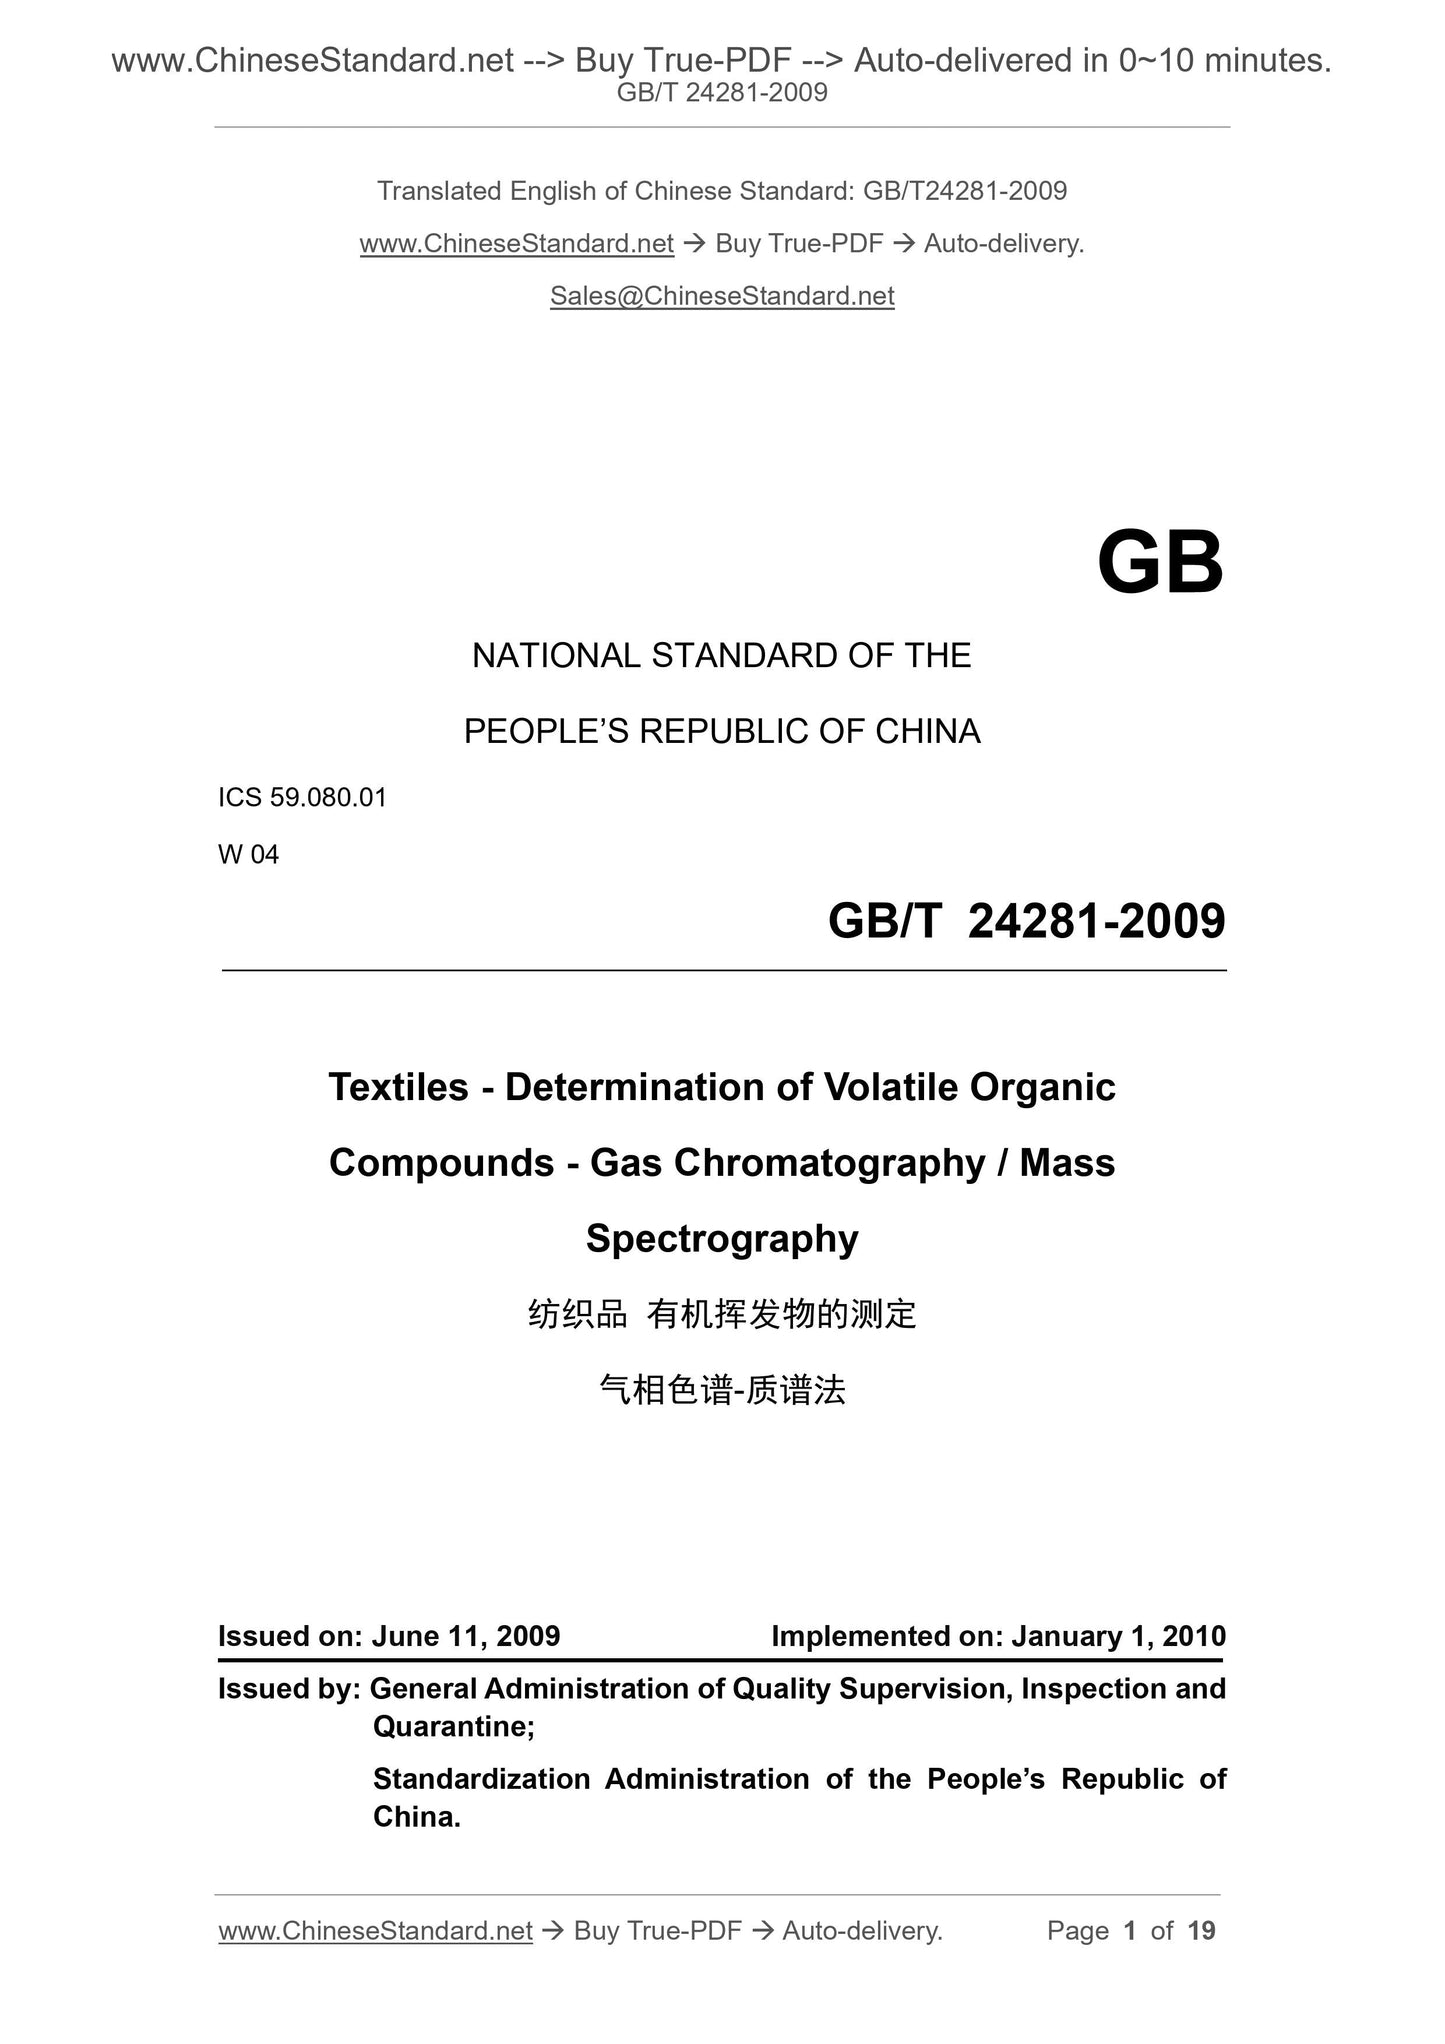 GB/T 24281-2009 Page 1